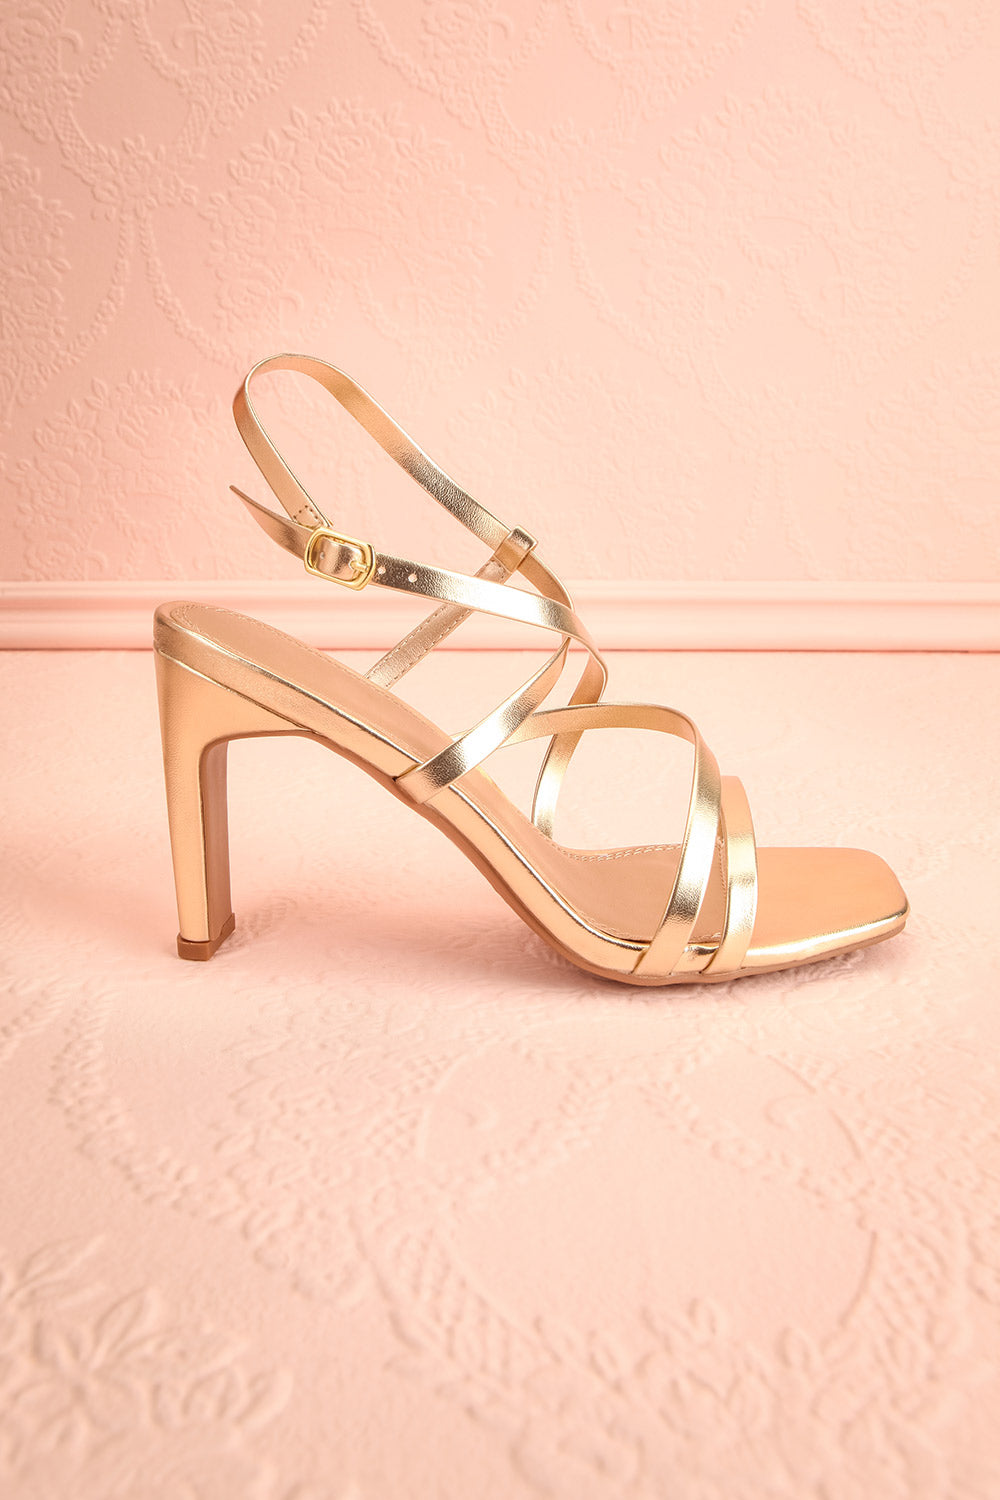 Mouvemente Gold Crossed Strap High Heel Sandals | Boutique 1861 side view